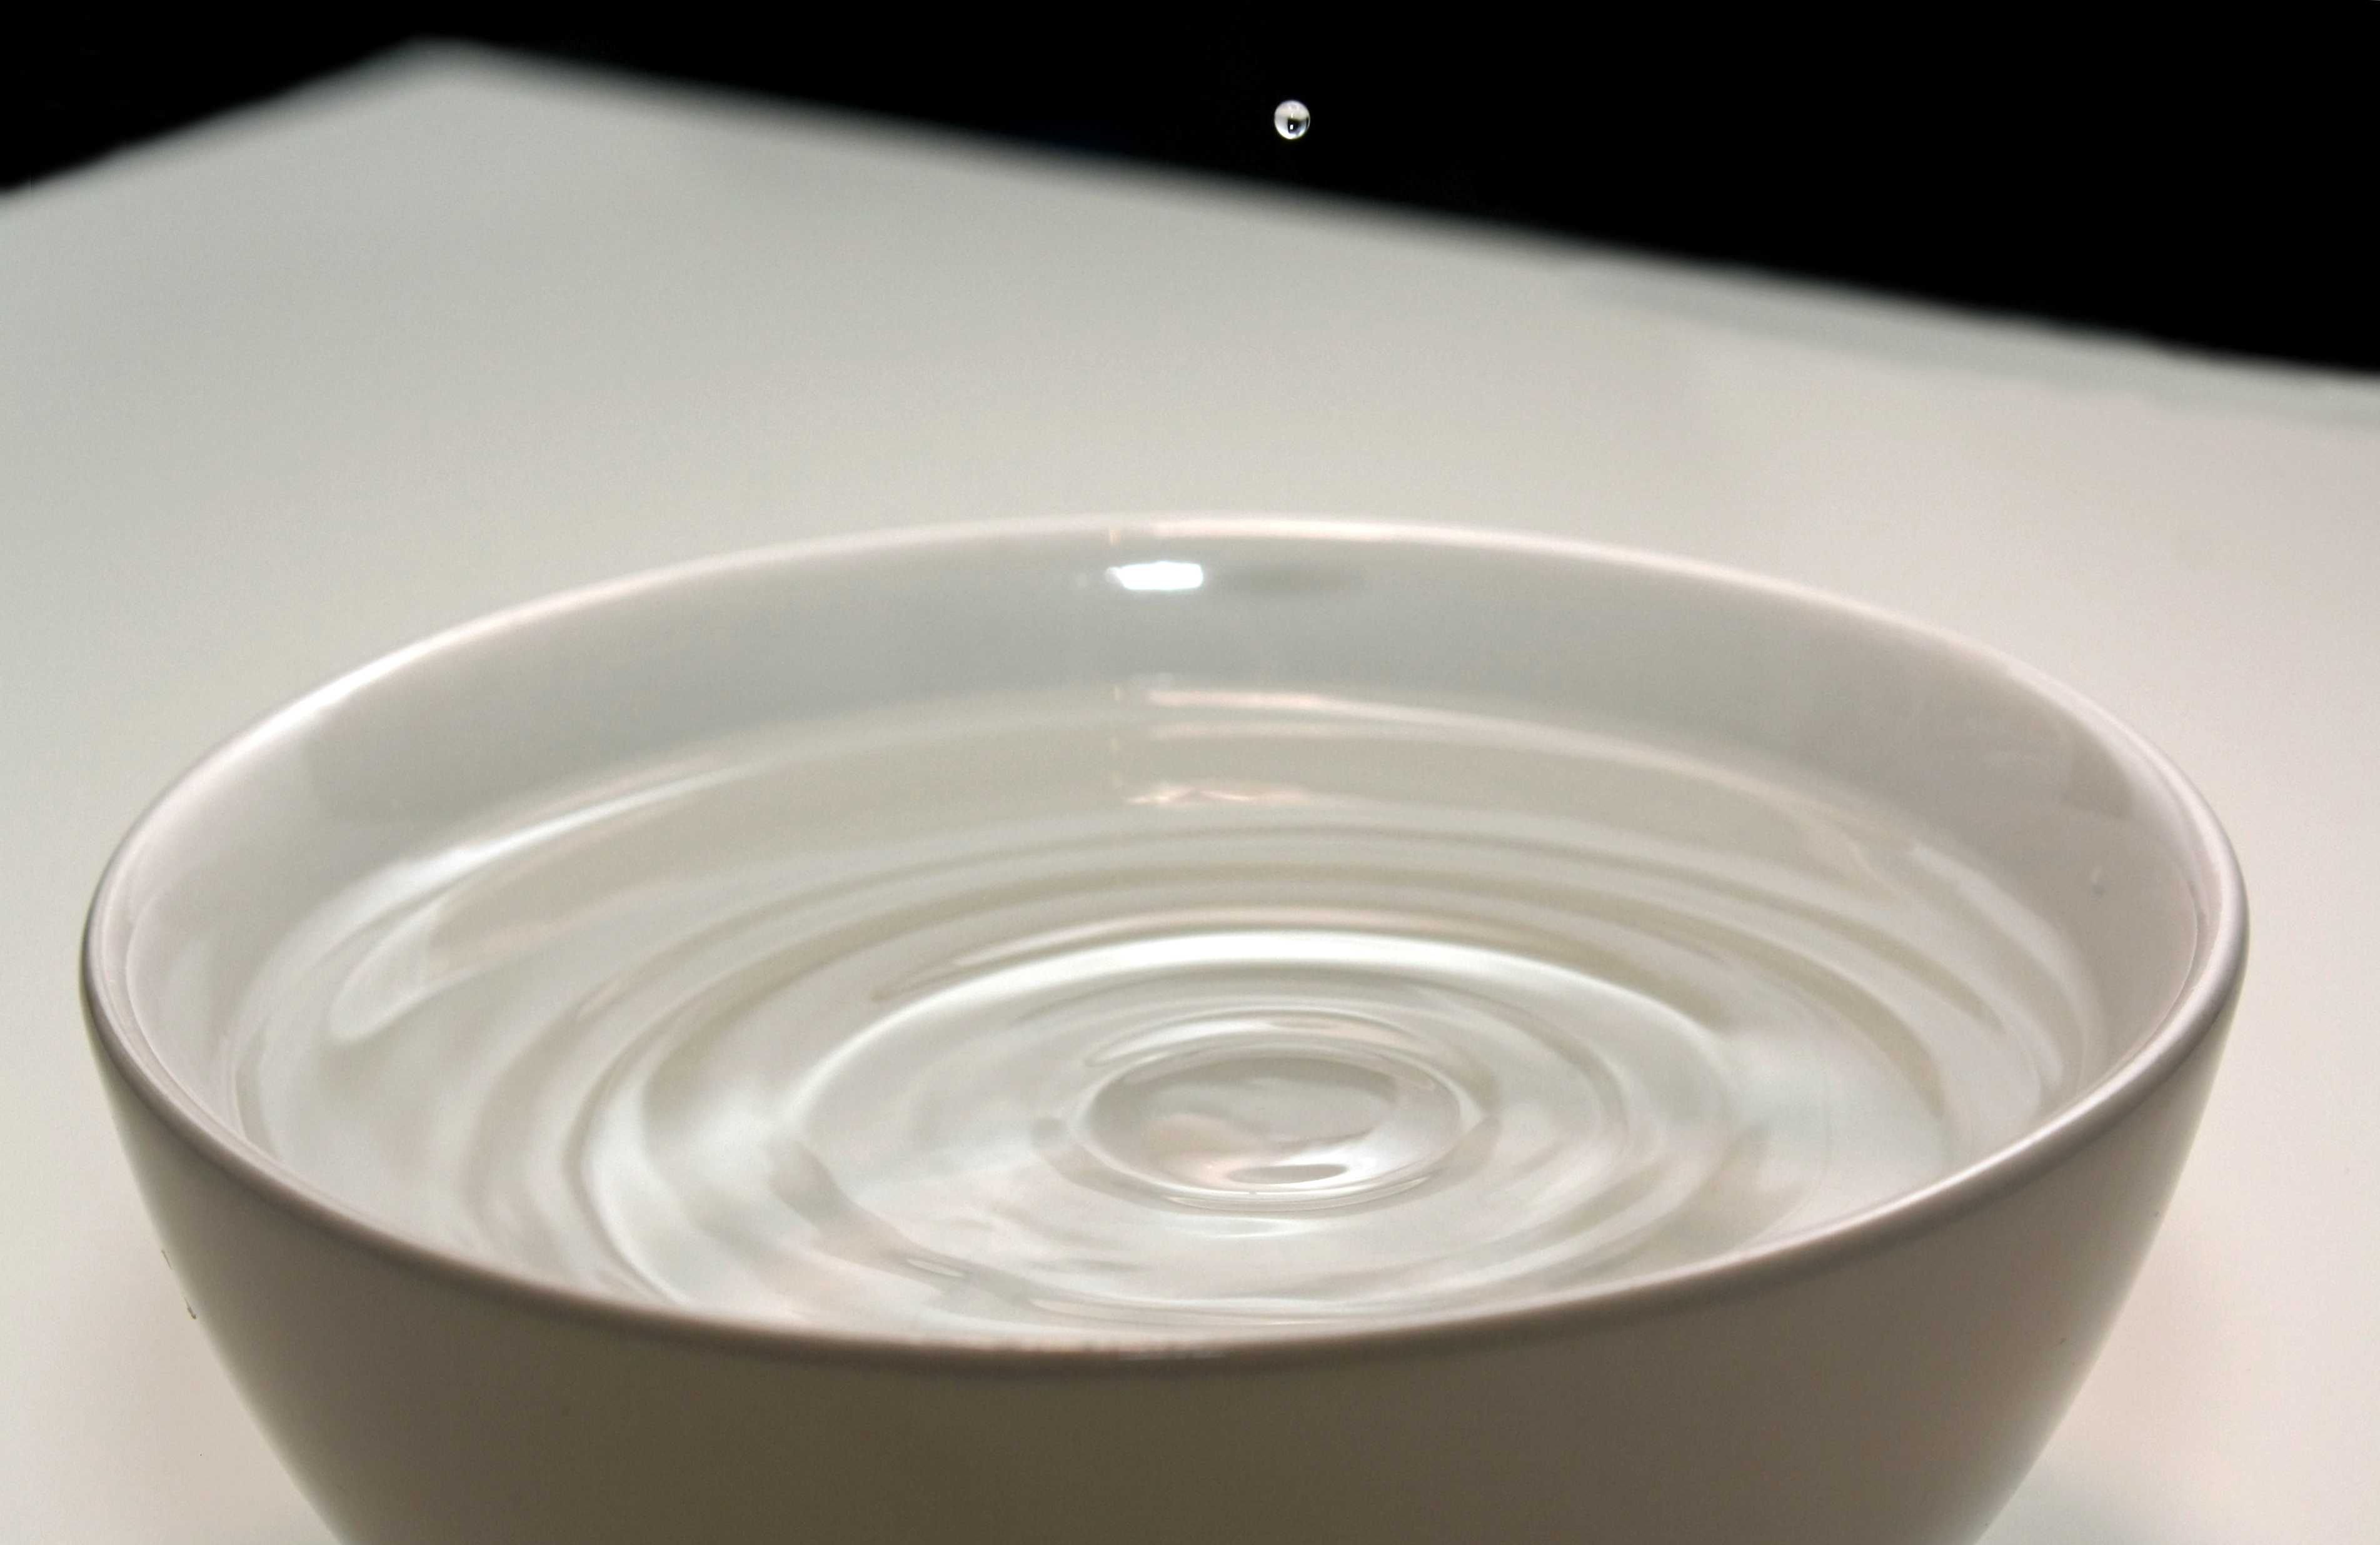 A tiny drop of water bouncing off of the surface of water in a bowl.